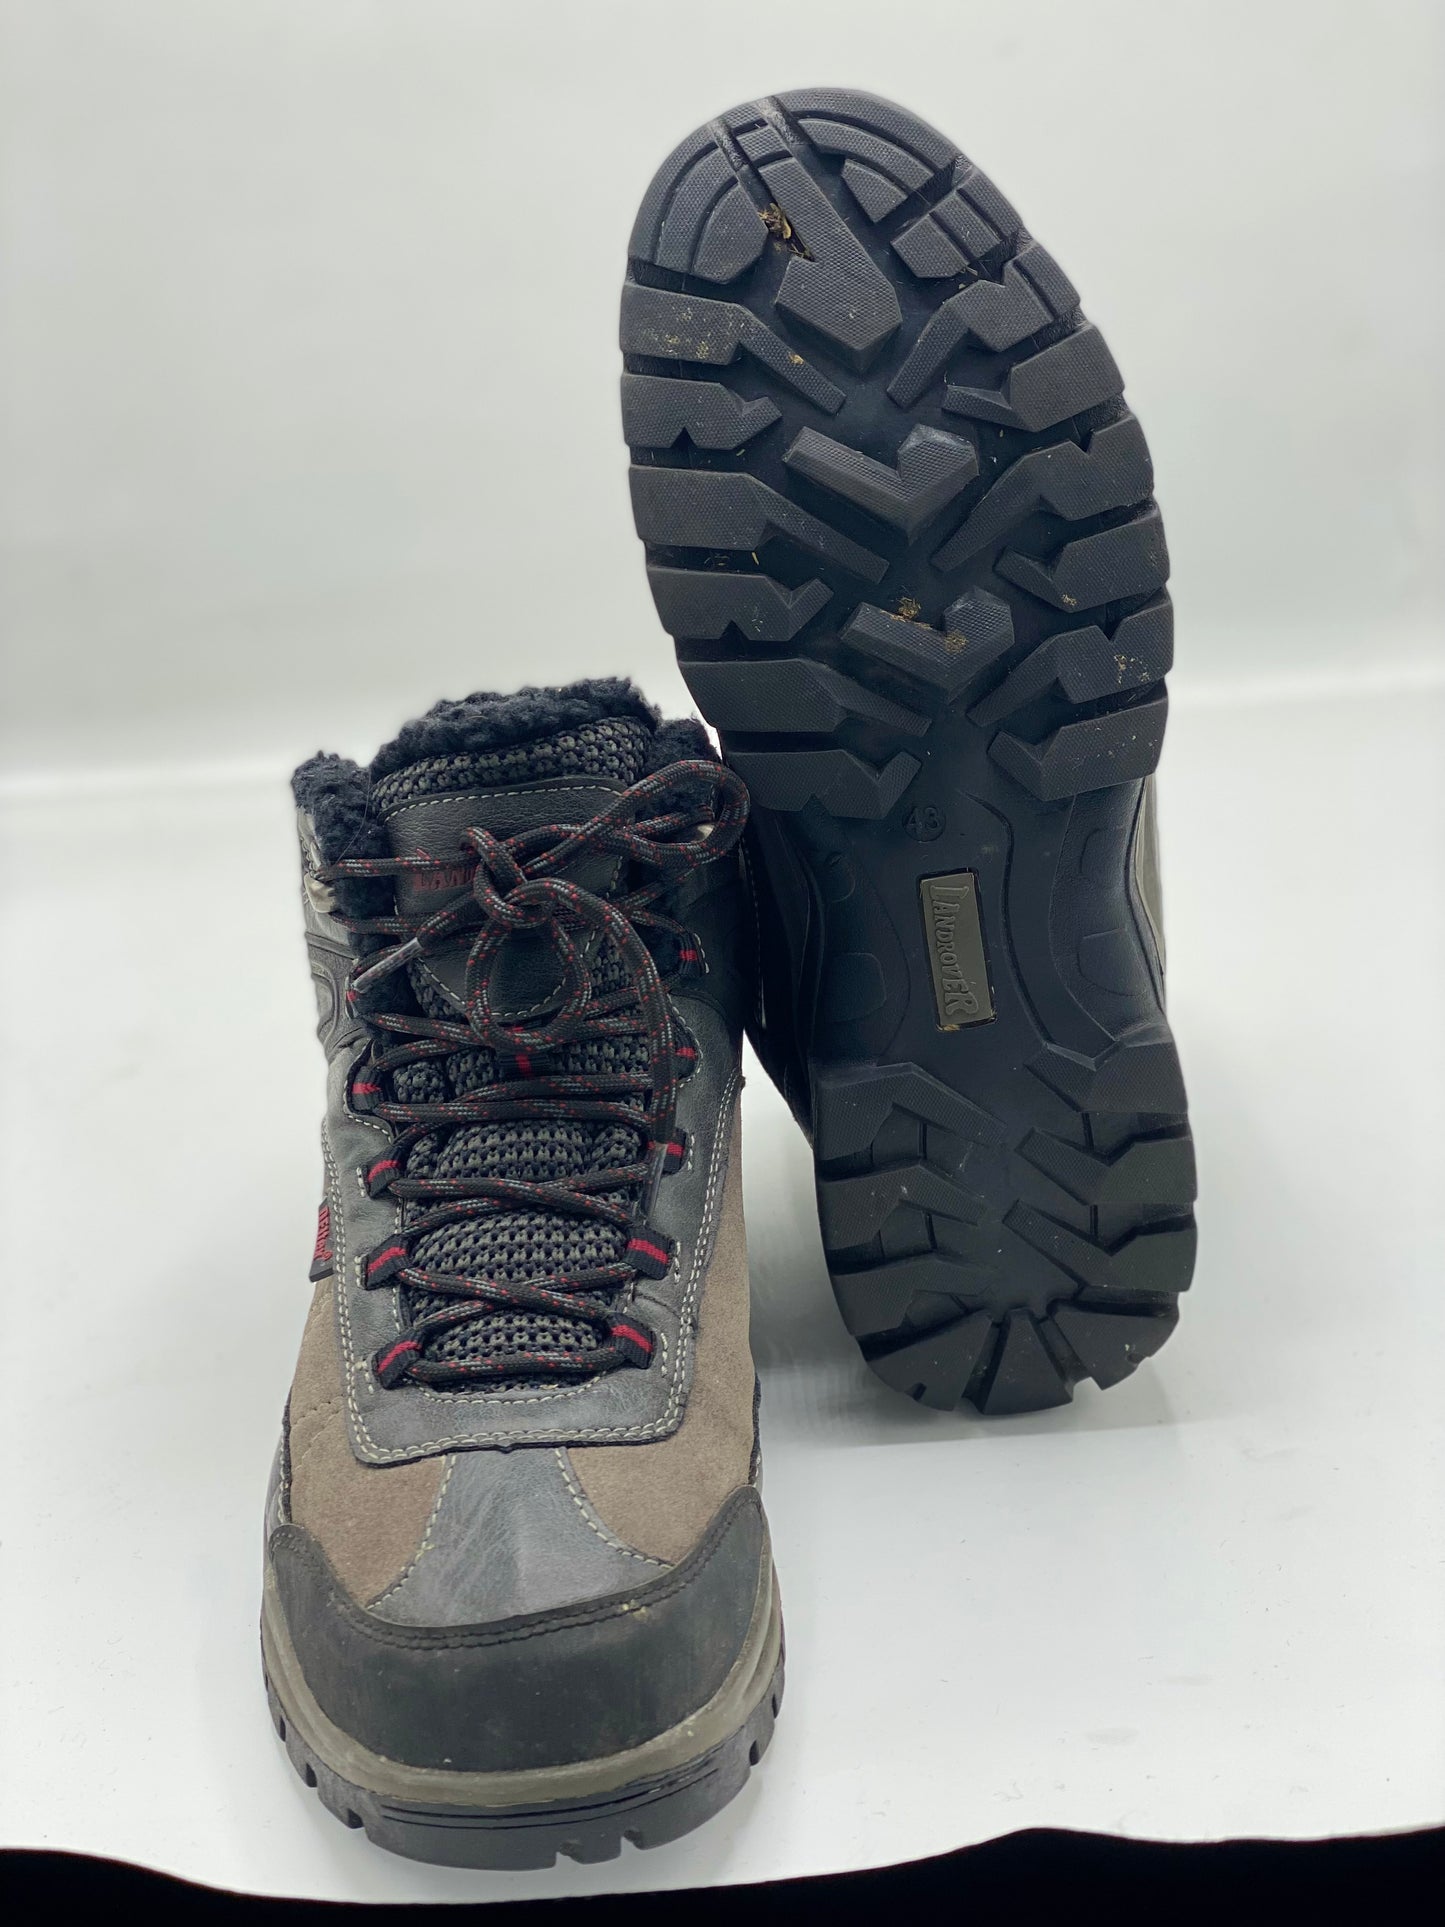 Land Rover Hiking Waterproof shoes